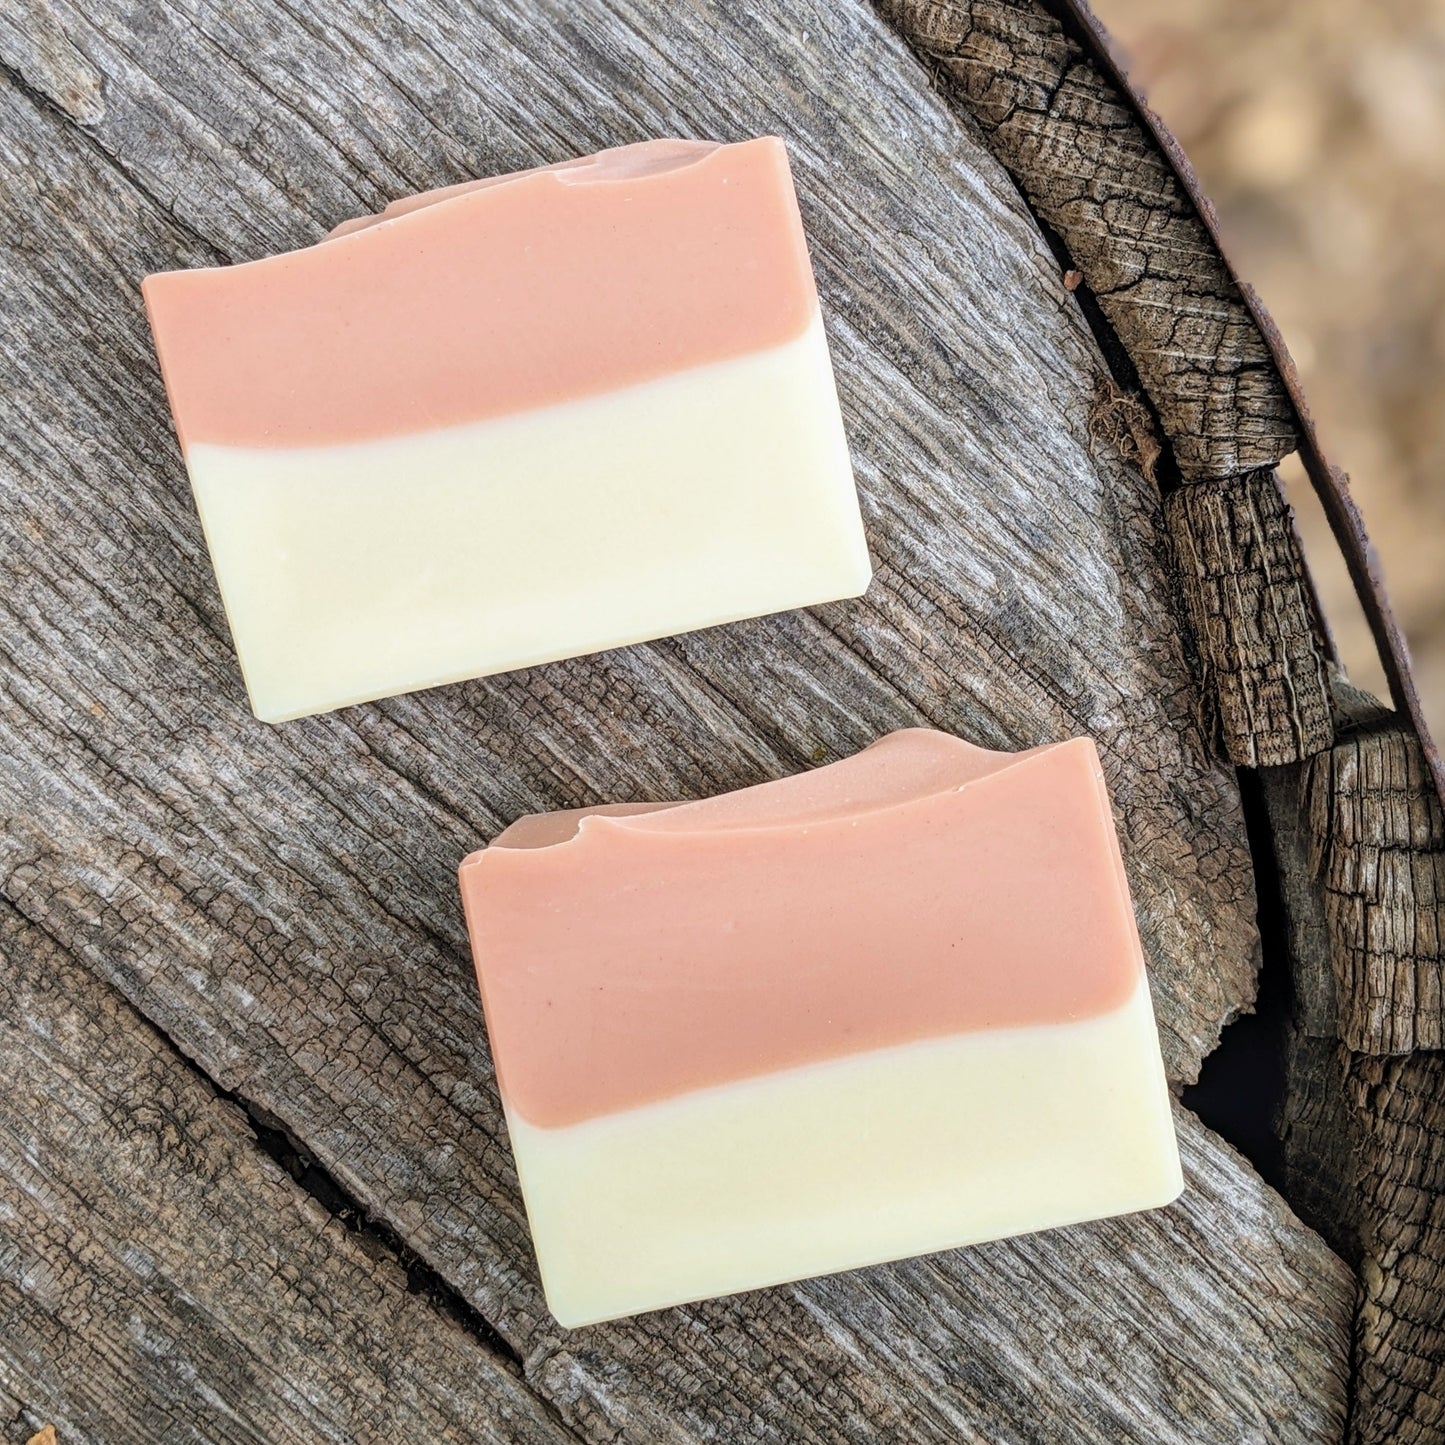 BUTTER ME UP - Unscented Shea & Cocoa Butter Soap